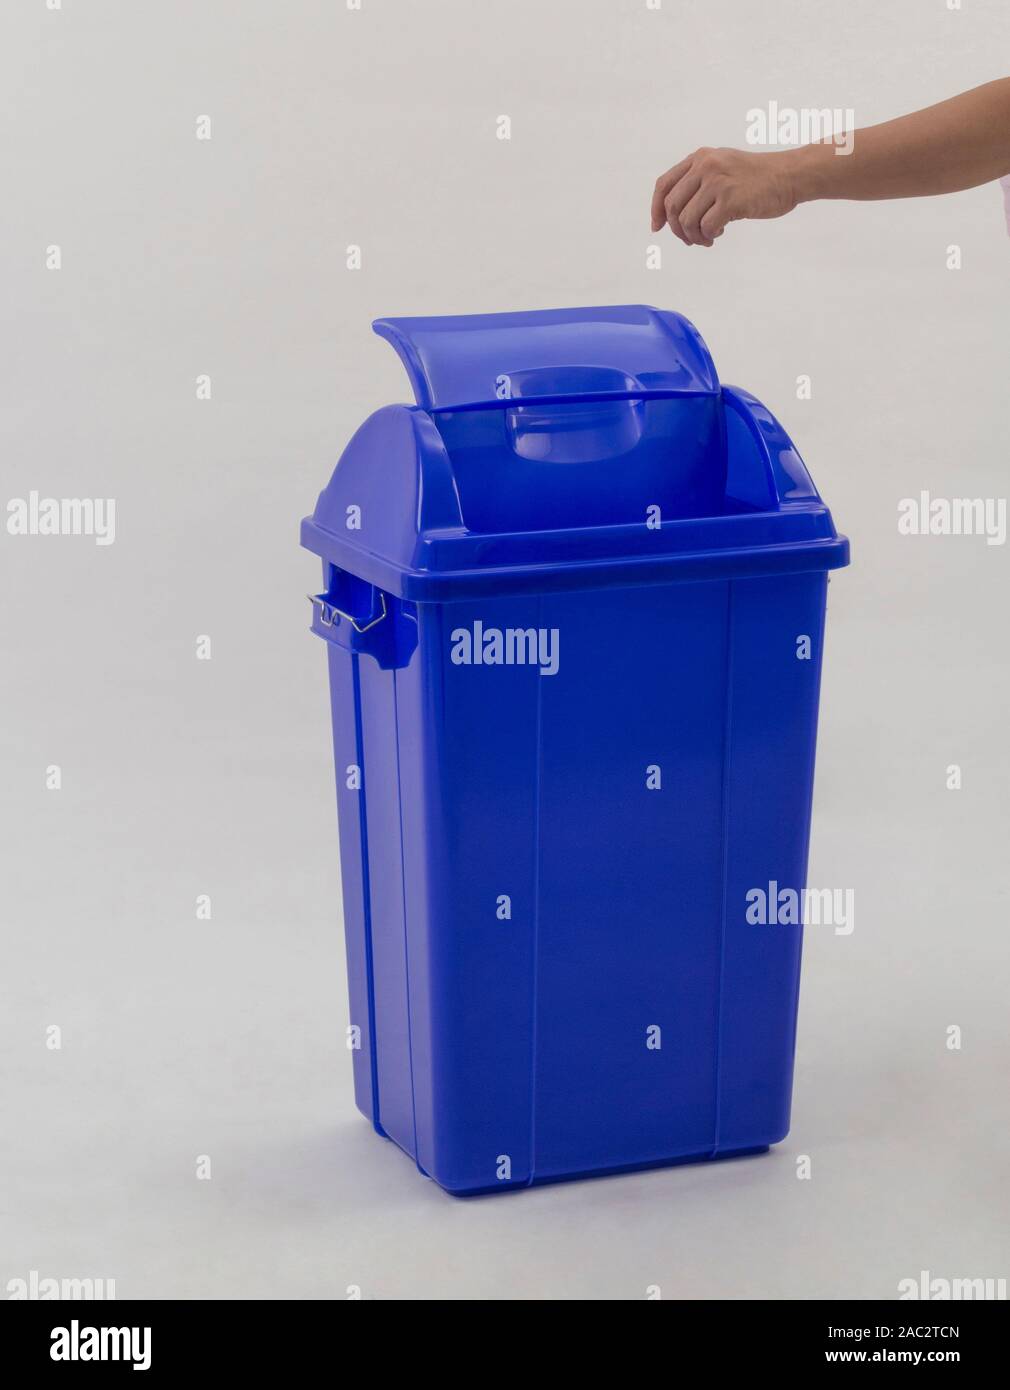 https://c8.alamy.com/comp/2AC2TCN/woman-hand-throwing-something-into-the-trash-can-isolated-on-white-background-2AC2TCN.jpg